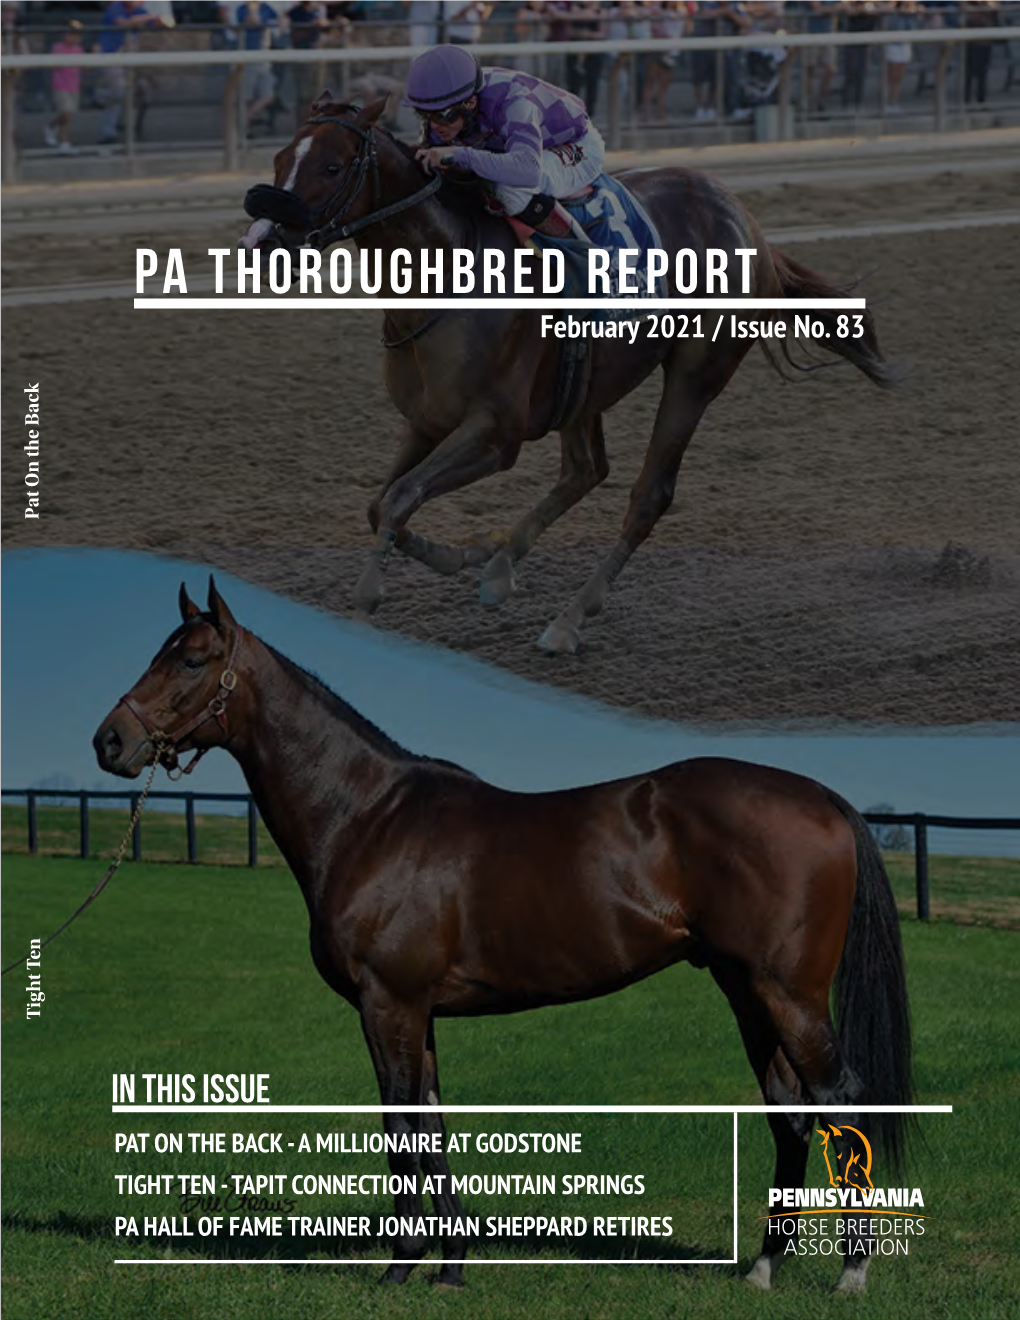 PA THOROUGHBRED REPORT February 2021 / Issue No